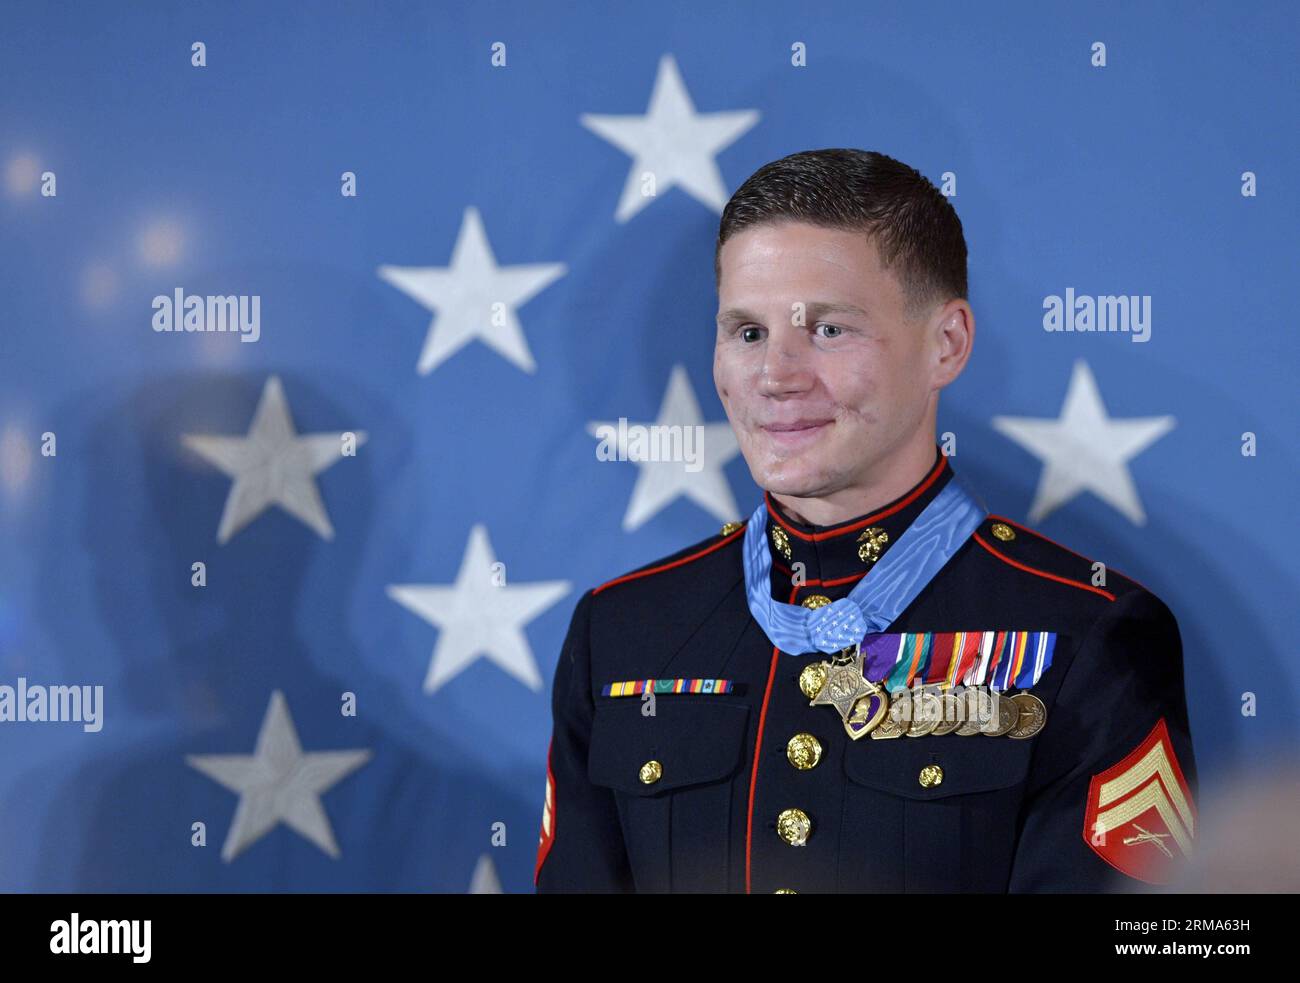 (140619) -- WASHINGTON D.C., June 19, 2014 (Xinhua) -- William Kyle Carpenter smiles after receiving the Medal of Honor from U.S. President Barack Obama during a ceremony in the East Room of the White House in Washington D.C., the United States, on June 19, 2014. Carpenter received the medal for covering a grenade to save fellow Marines during a Taliban attack in November 2010. Carpenter is the eighth living recipient chosen for the highest military award. (Xinhua/Yin Bogu) US-WASHINGTON D.C.-MEDAL OF HONOR-CARPENTER PUBLICATIONxNOTxINxCHN   Washington D C June 19 2014 XINHUA William Kyle Carp Stock Photo